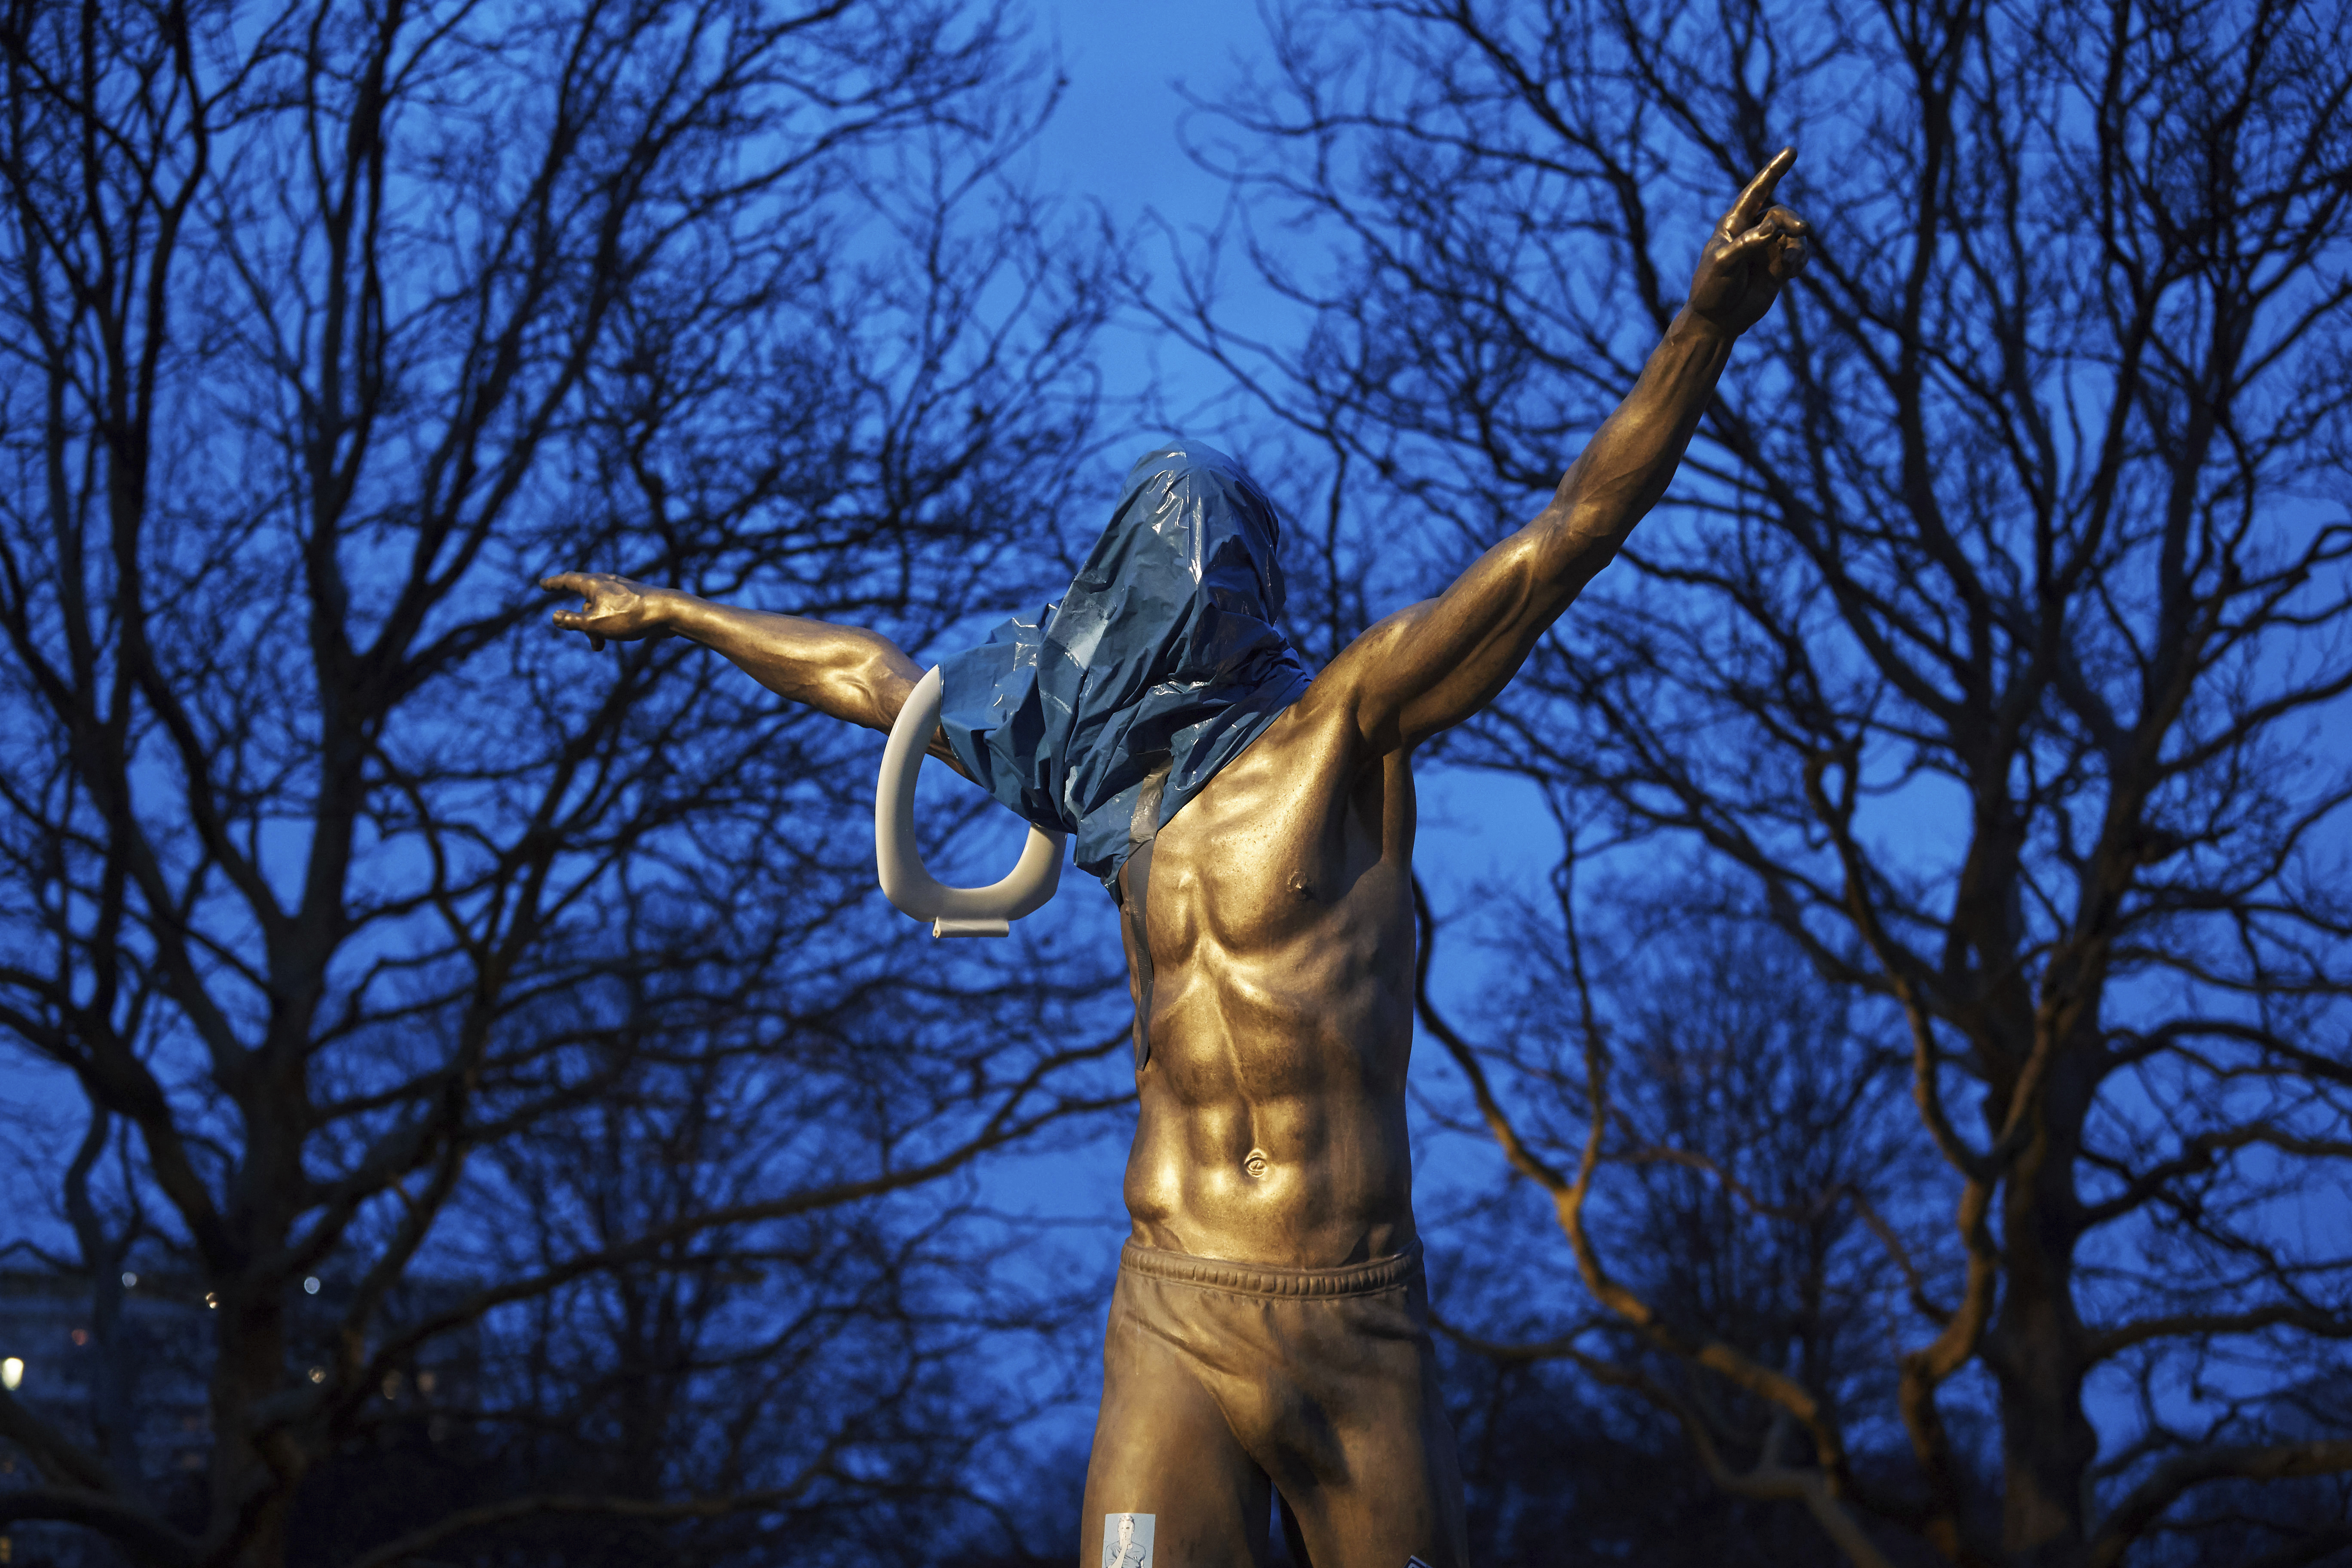 A blue plastic bag and a toilet seat hangs from the statue of Zlatan Ibrahimovic in Malmo